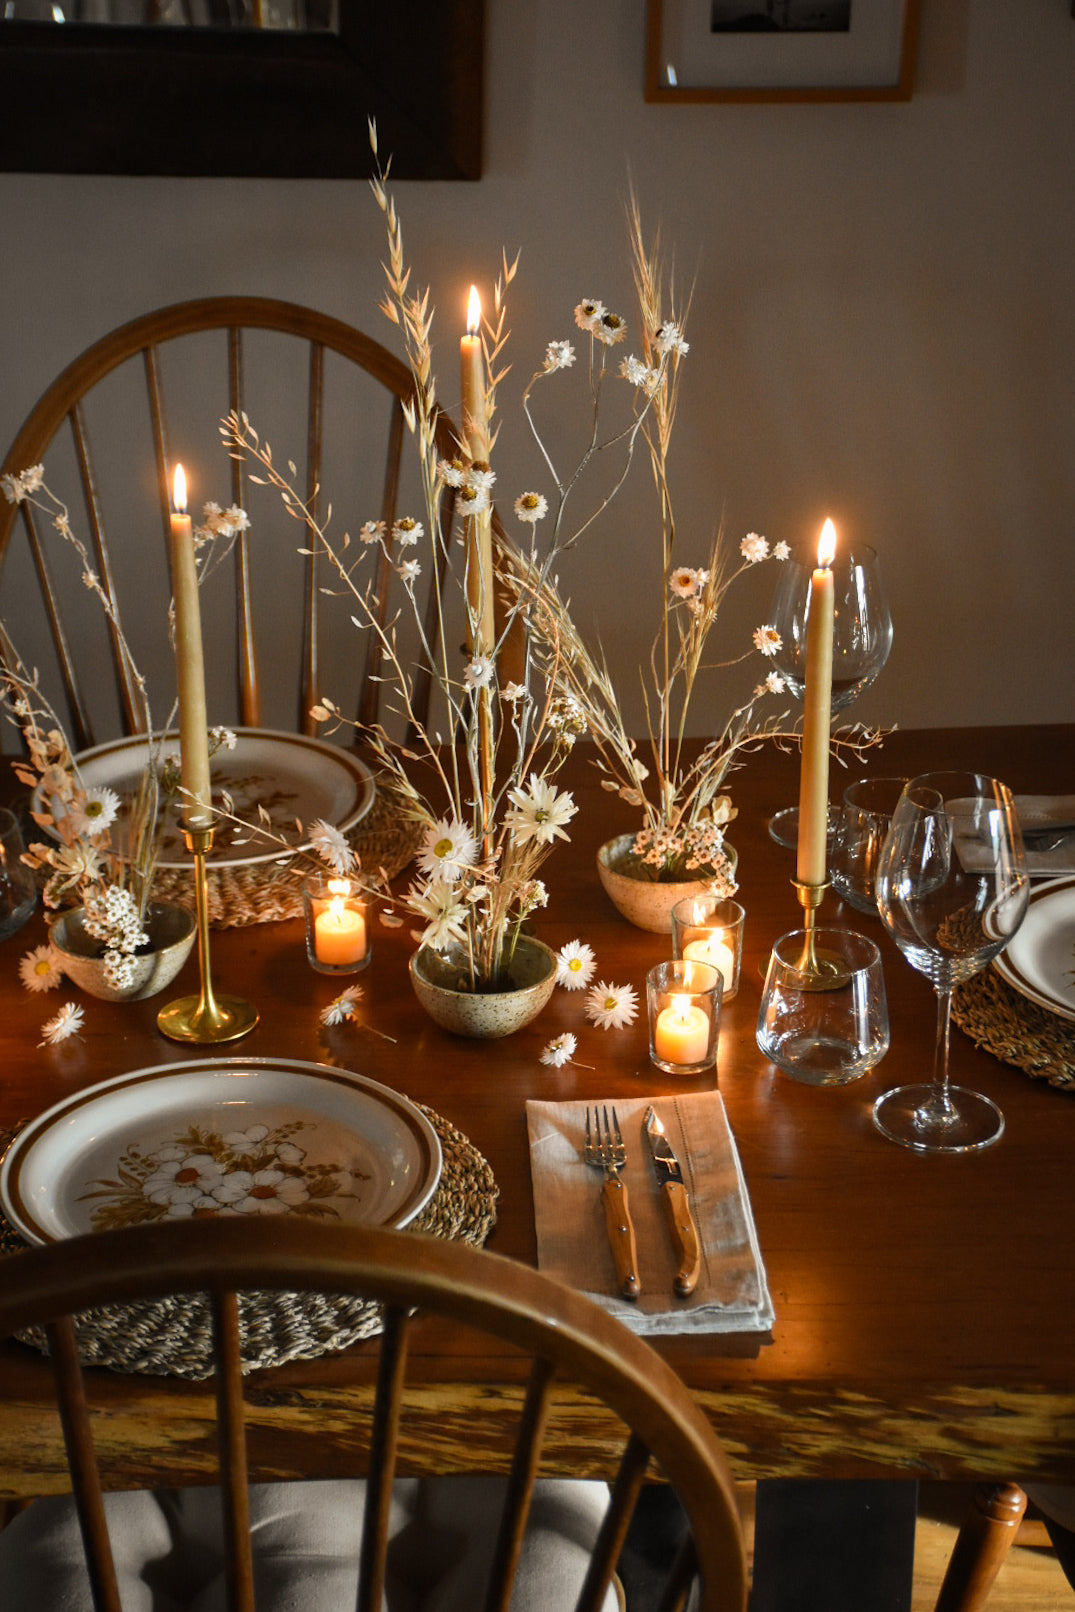 festive styling with dried flowers and candlelight amble and twine dried flowers australia